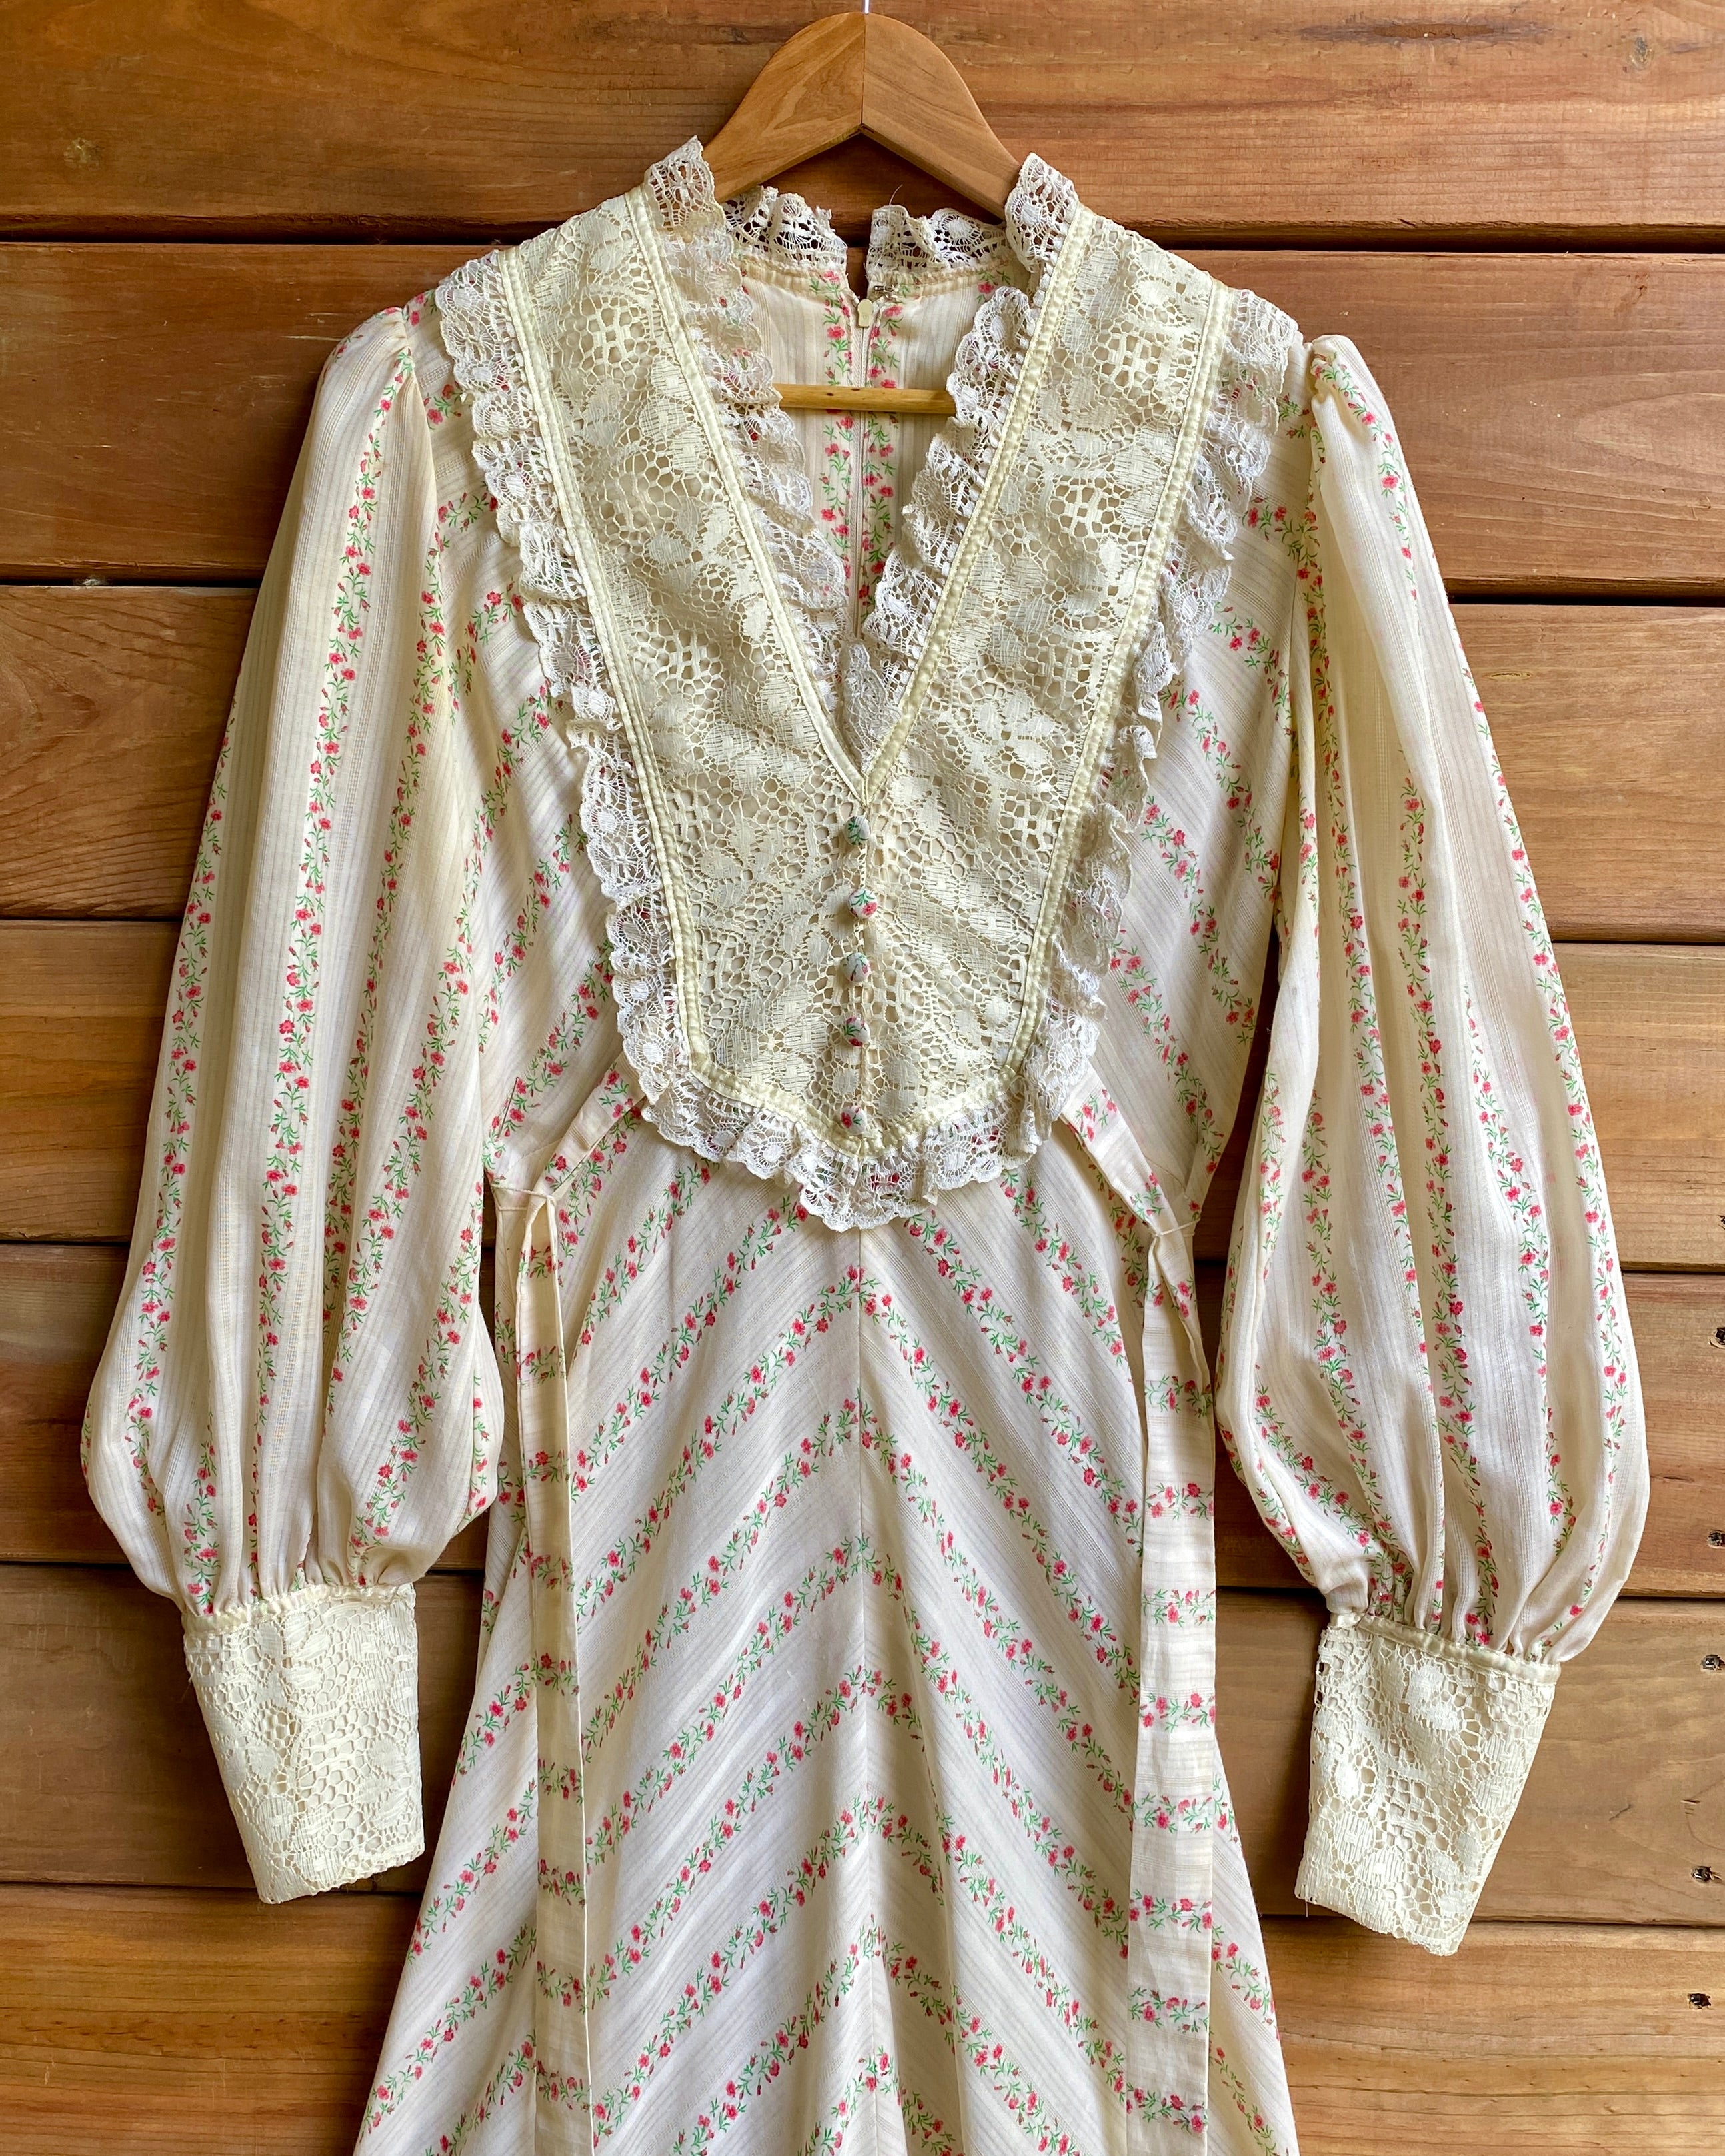 VINTAGE 1970s Floral Cream and lace Victoriana / Prairie Dress Gunne Sax Style S 4